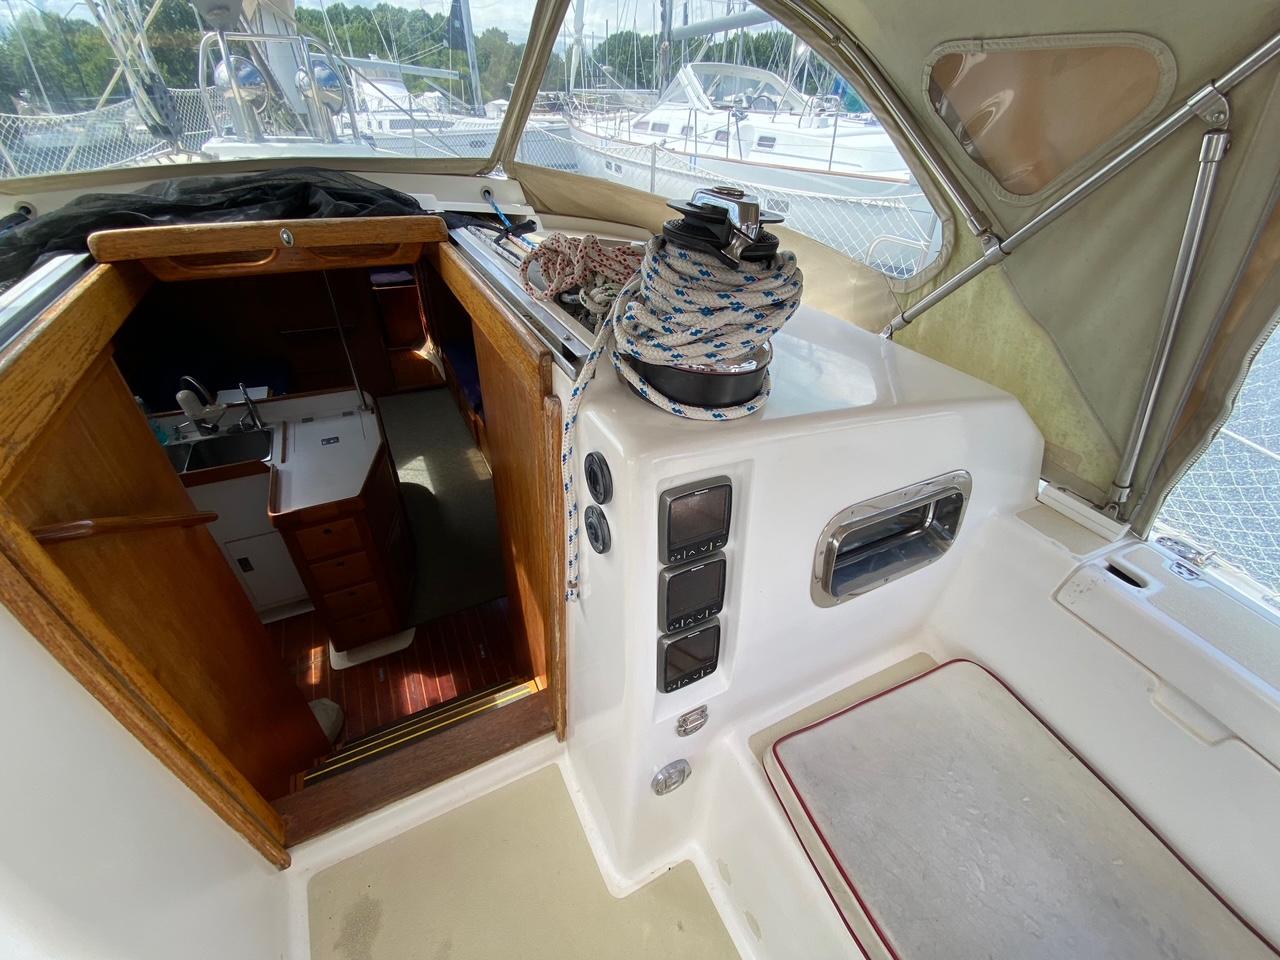 Ionia Yacht Brokers Of Annapolis